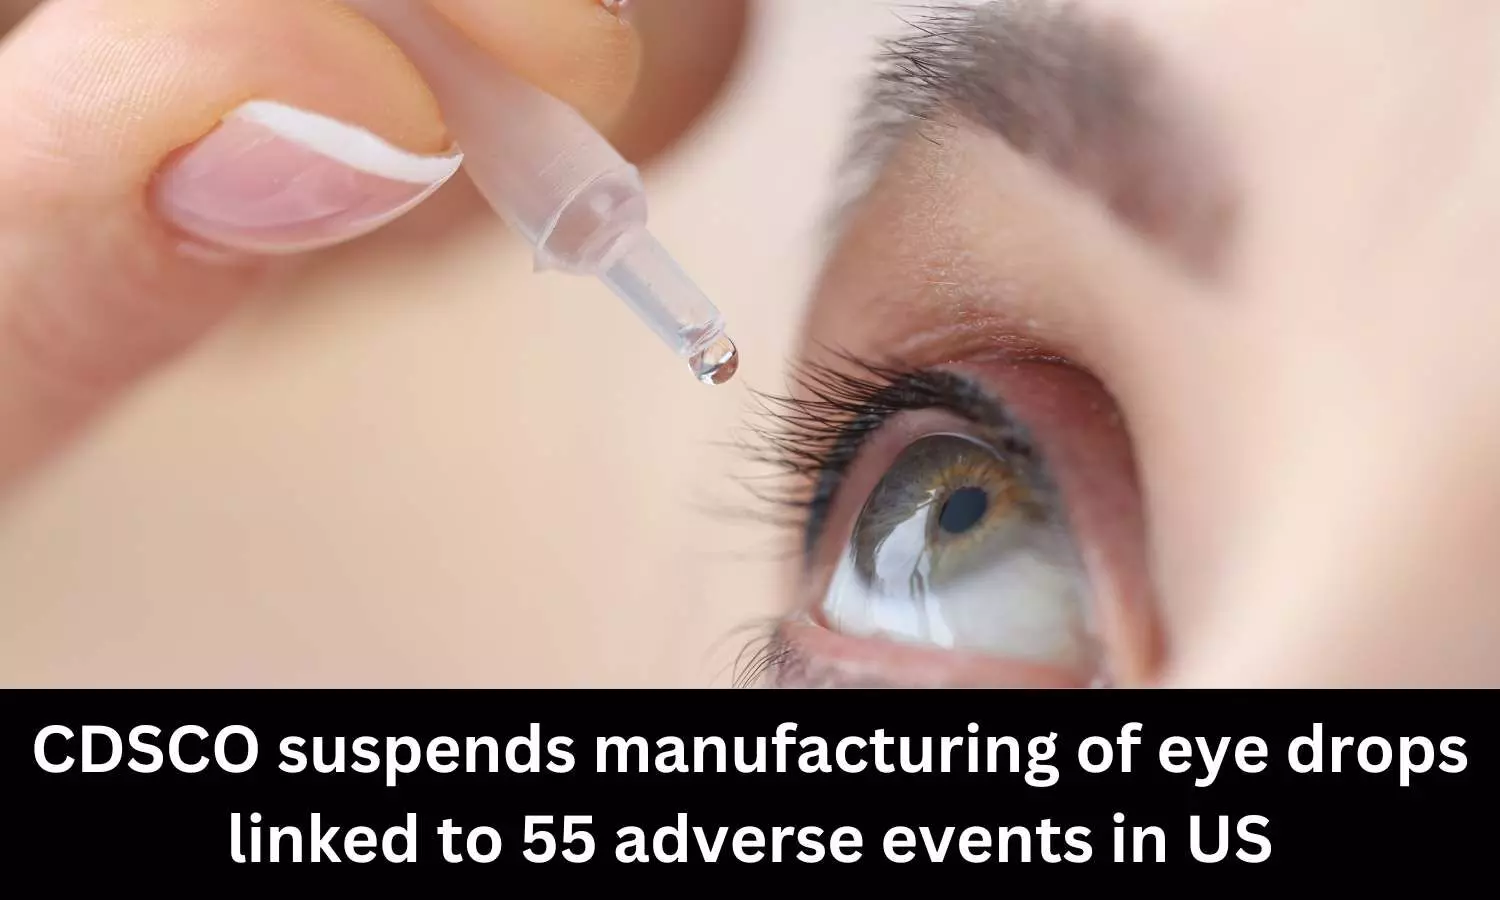 Manufacturing of eye drops linked to 55 adverse events in US suspended by CDSCO